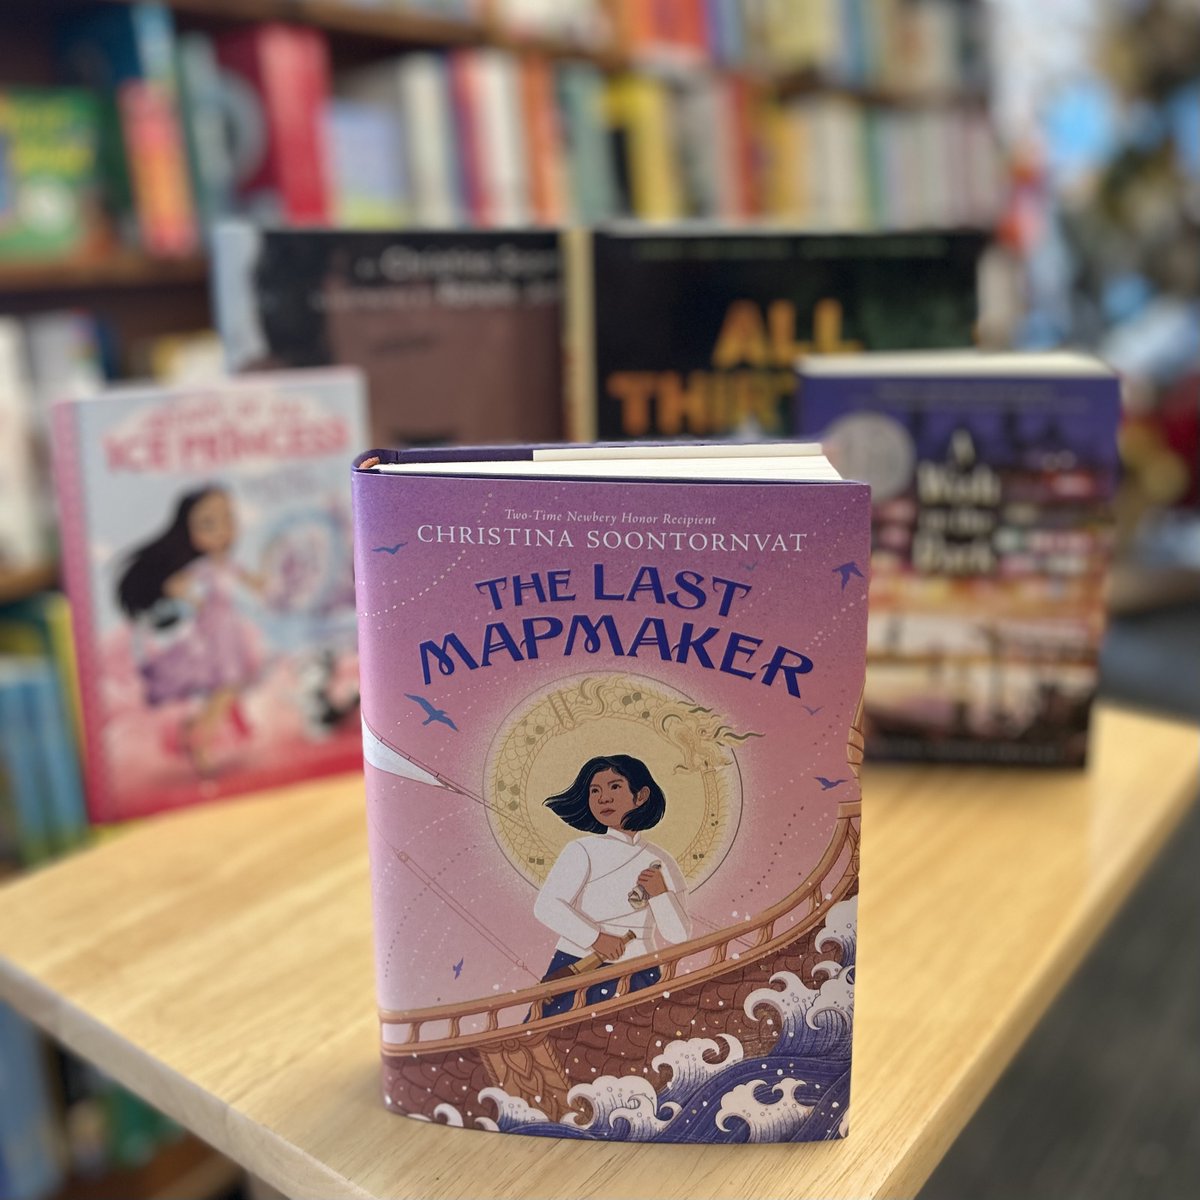 One more week until @soontornvat's book talk on her middle-grade book, 'The Last Mapmaker'! ⁠🗺️⁠The VIRTUAL event will take place on Tuesday, November 15th from 10:30-11:15 AM. ⁠ For more information, or to order the book, check out childrensbookworld.com/event/exclusiv…!